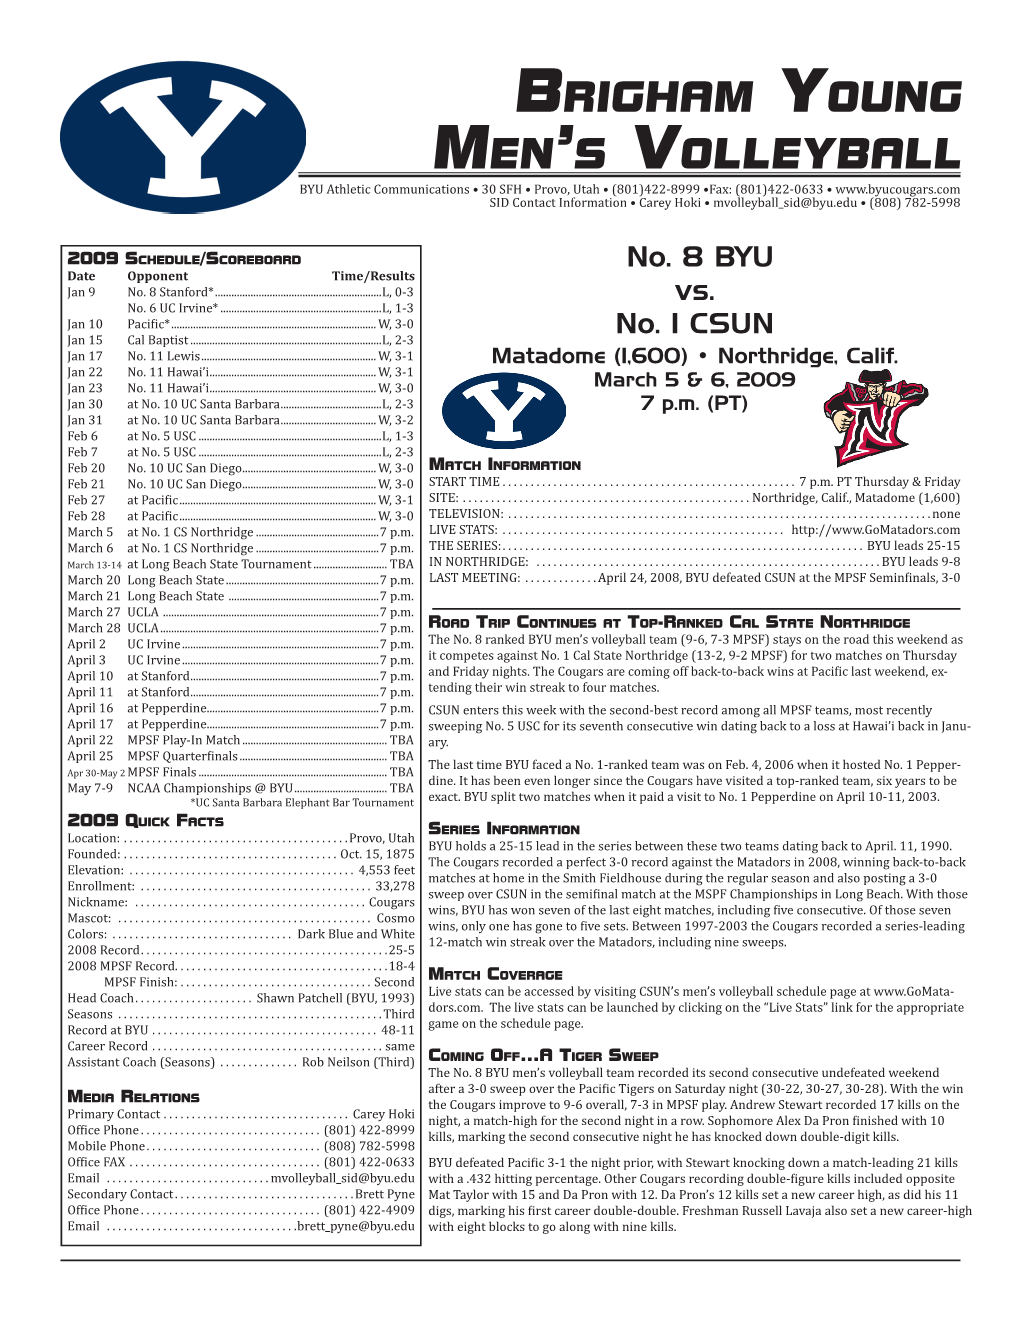 Brigham Young Men's Volleyball